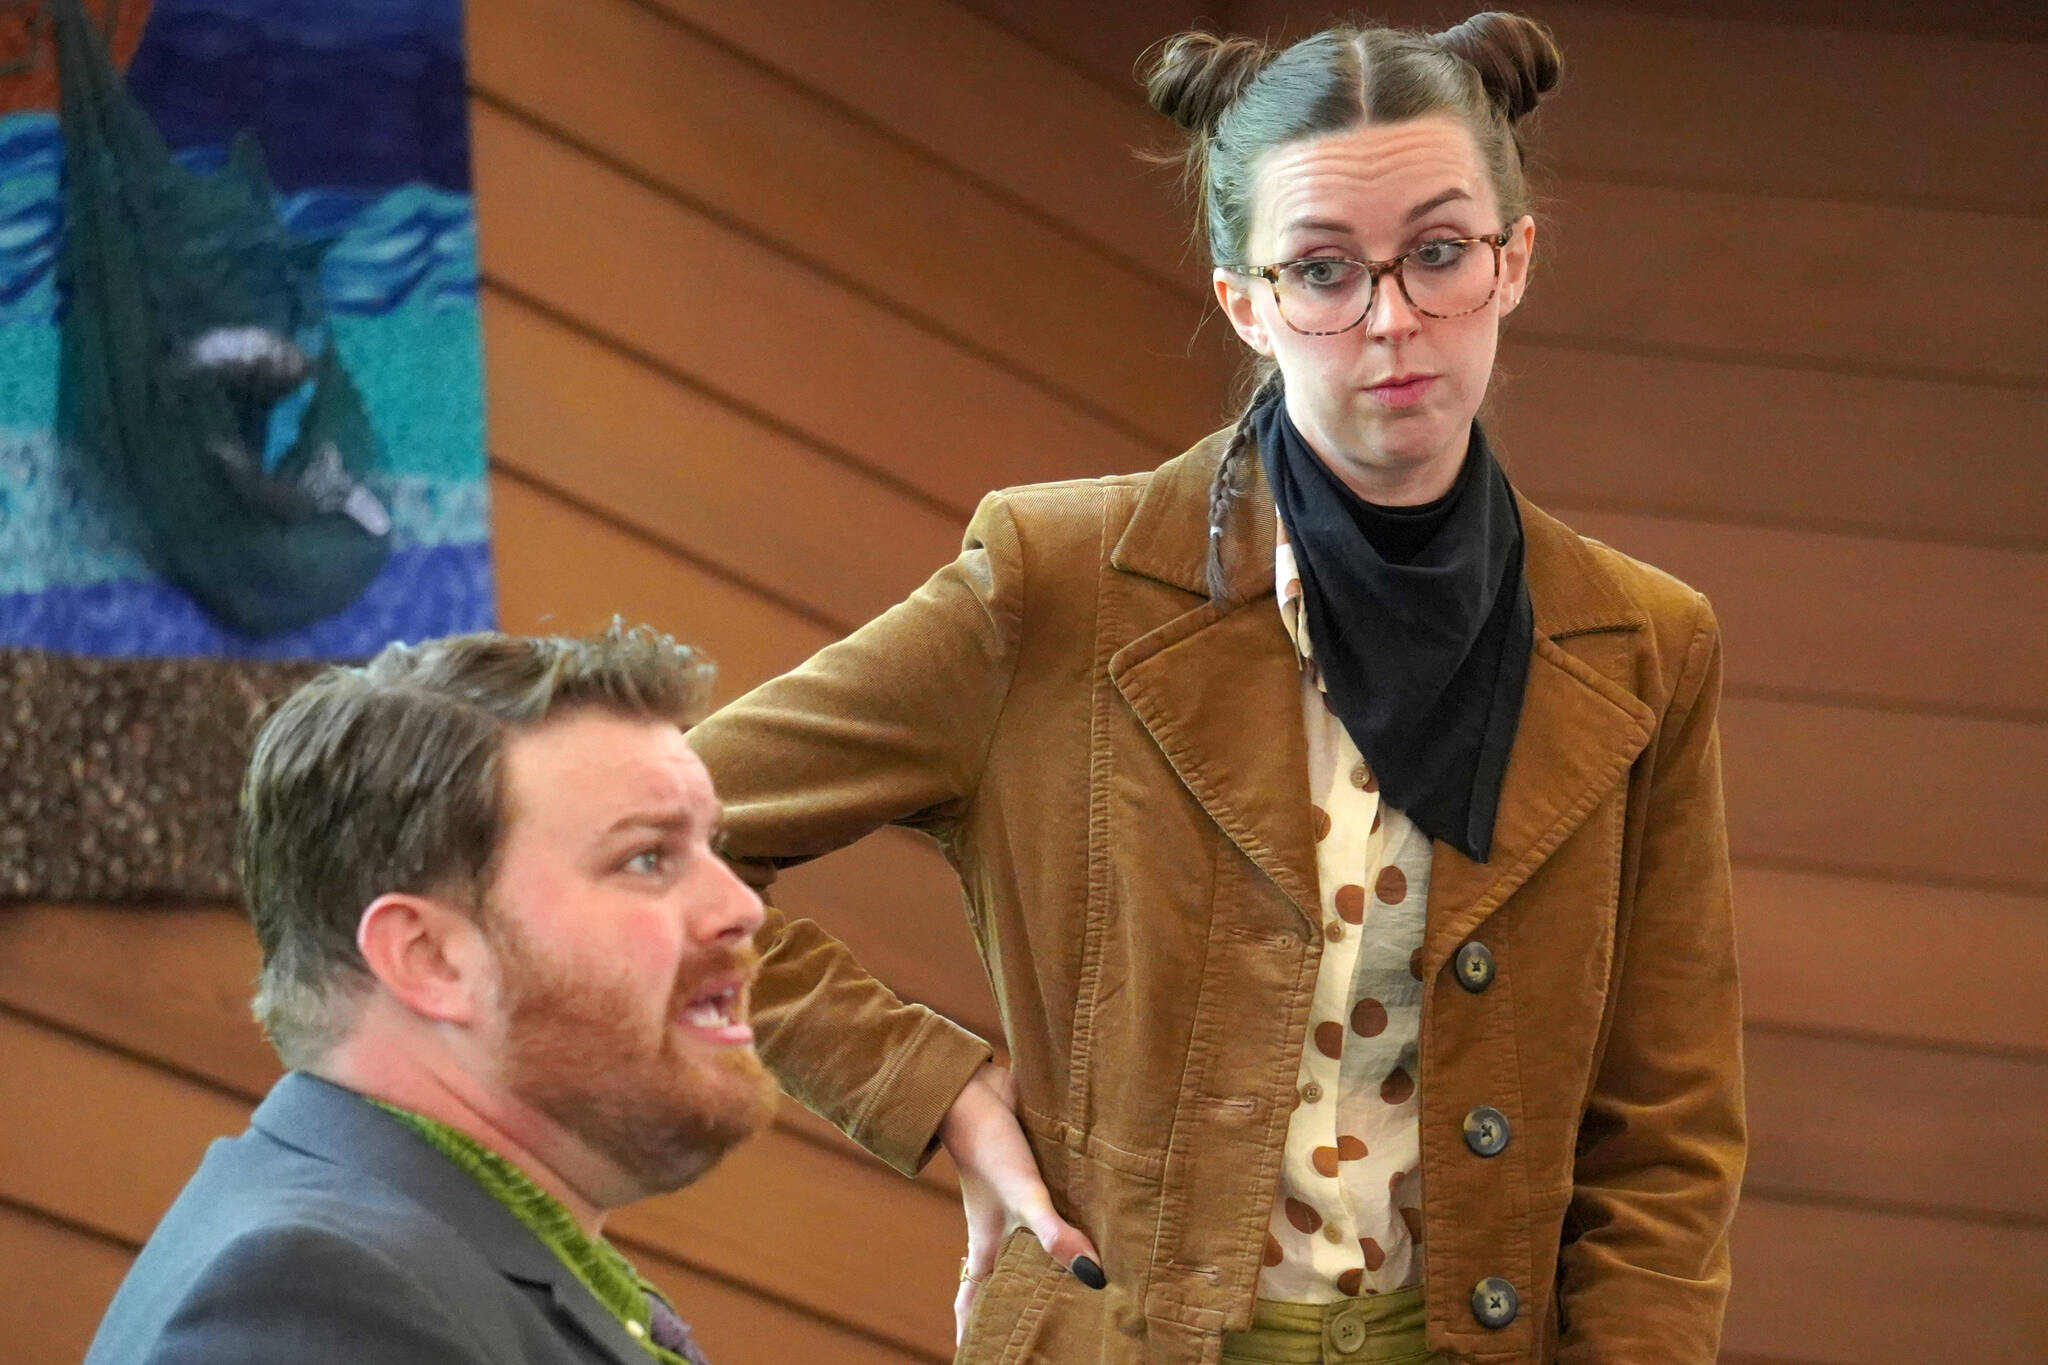 Joe Spady portrays Mr. Toad and Hayley Vest portrays Rat in a rehearsal for Treefort Theatre’s “The Wind in the Willows” at Christ Lutheran Church in Soldotna, Alaska, on Sunday, Aug. 13, 2023. (Jake Dye/Peninsula Clarion)